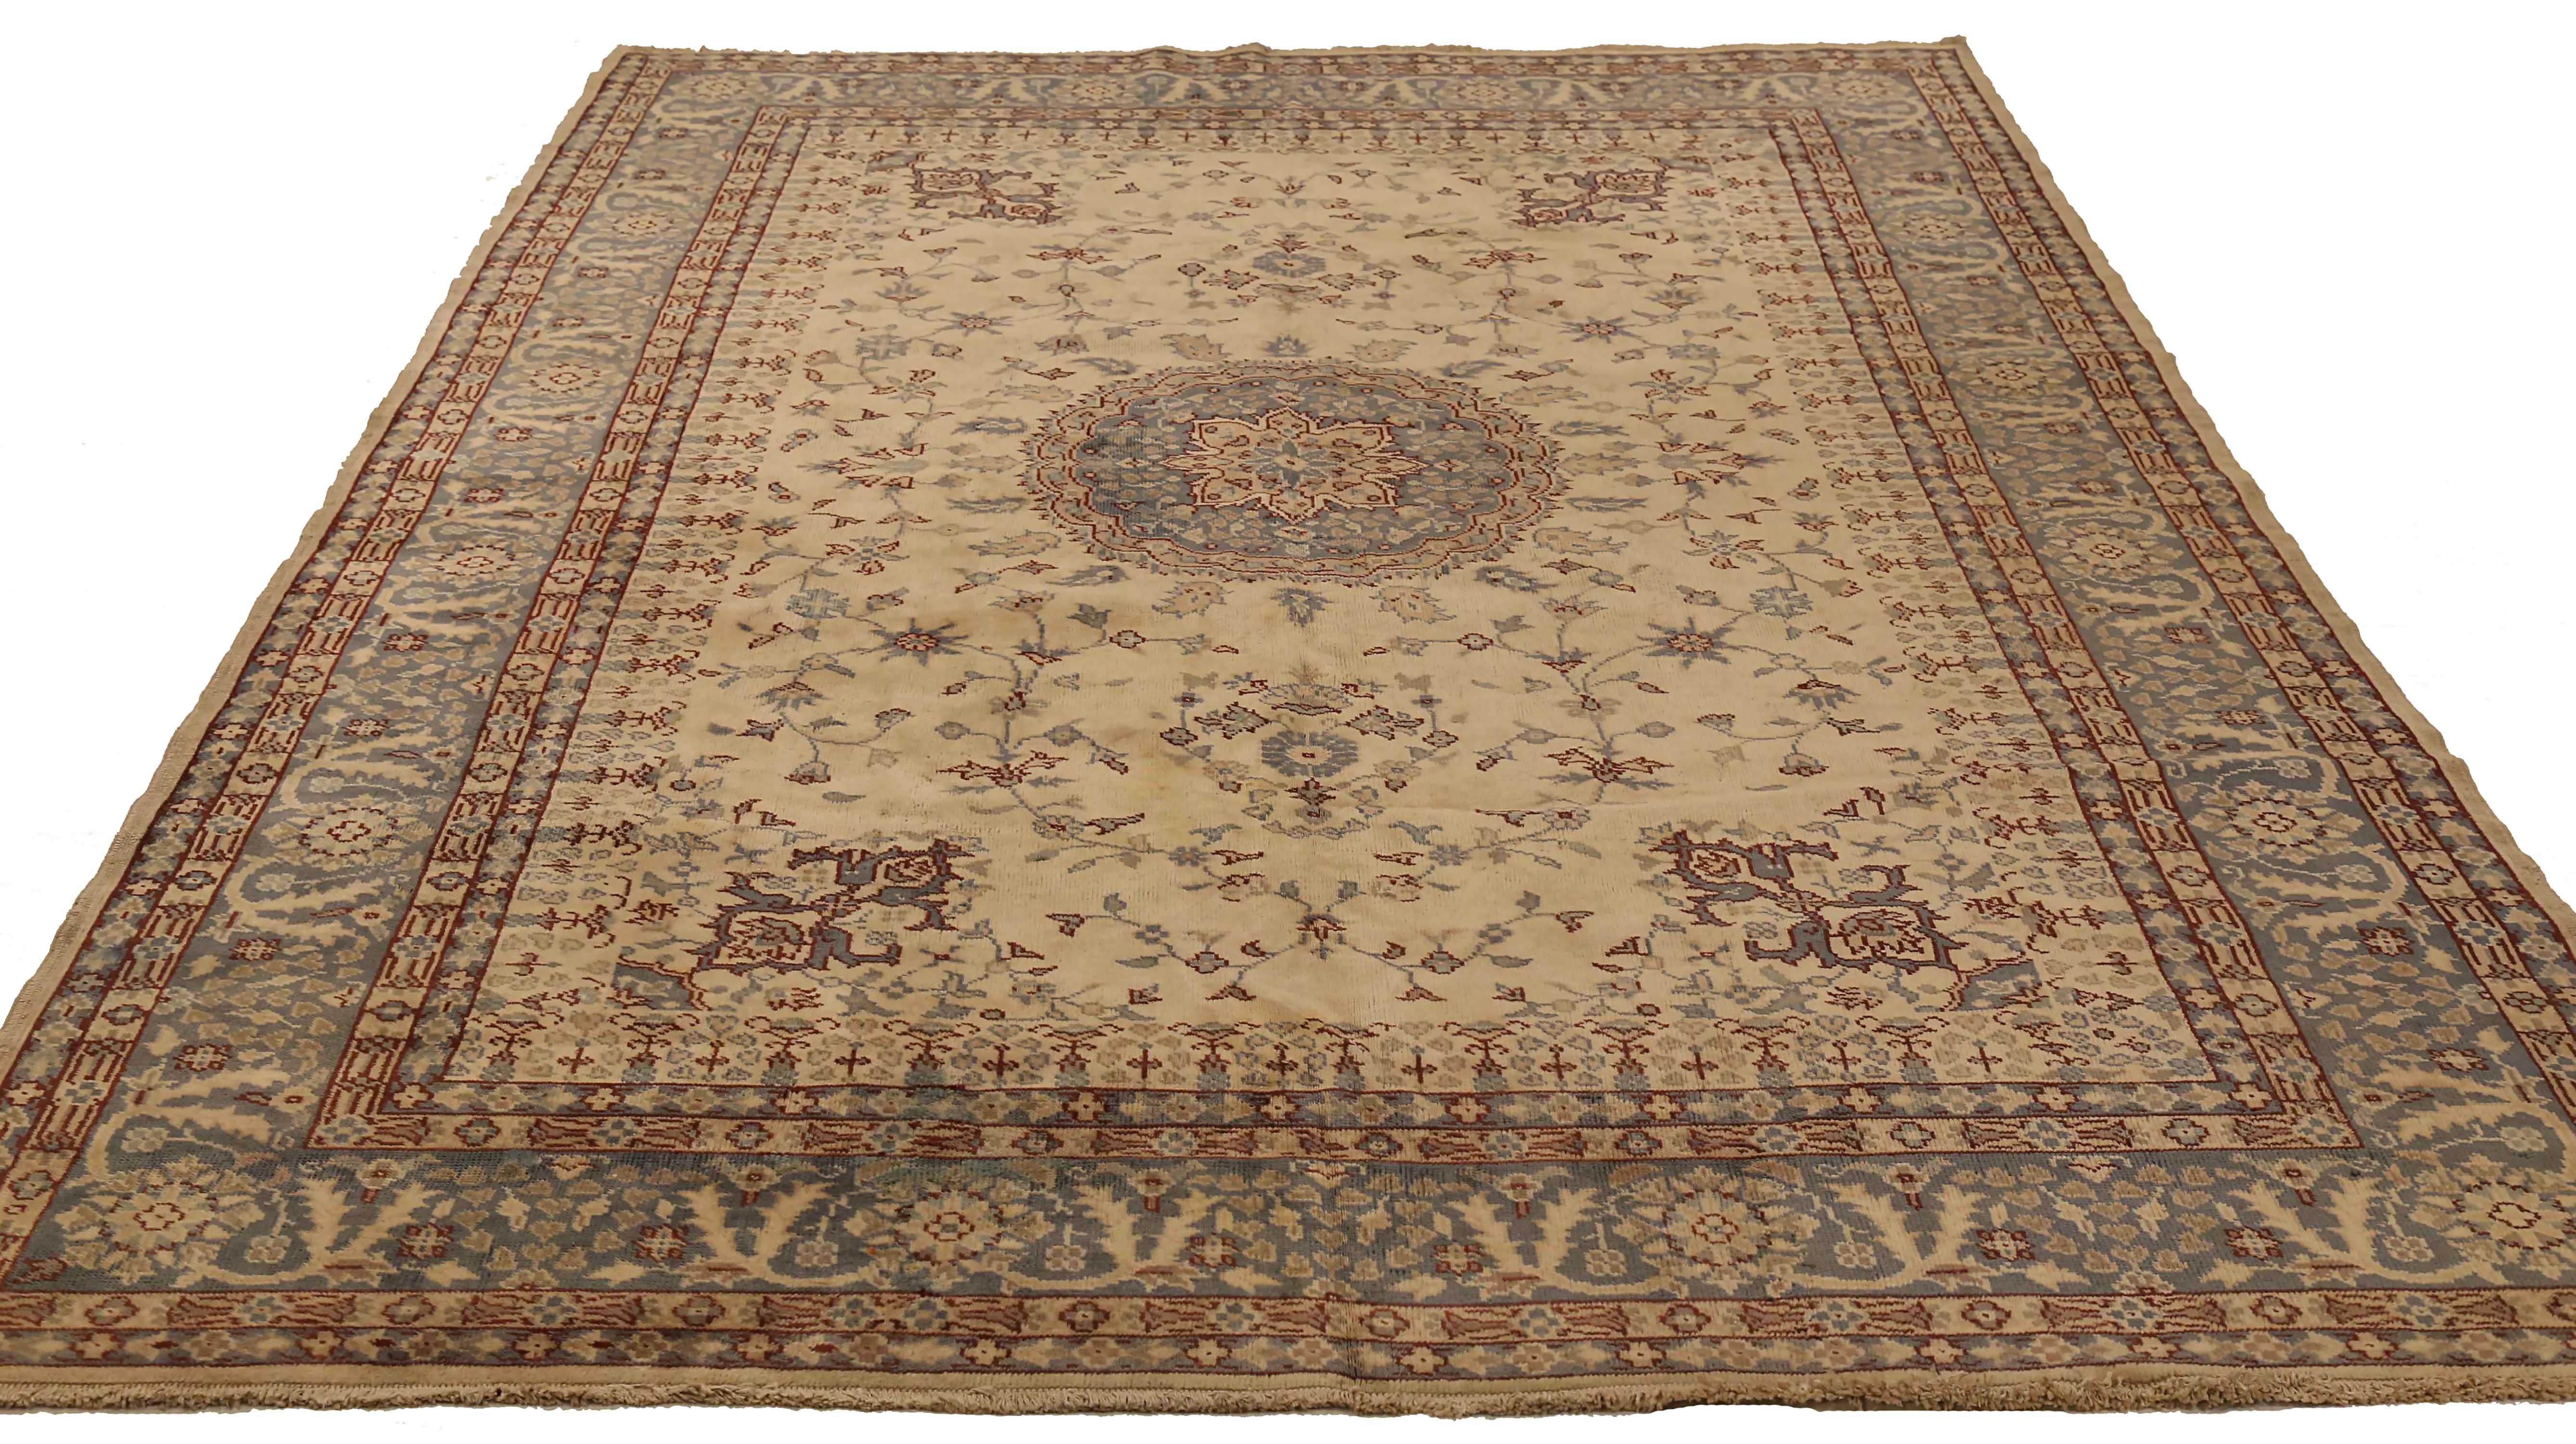 Antique Turkish area rug handwoven from the finest sheep’s wool. It’s colored with all-natural vegetable dyes that are safe for humans and pets. It’s a traditional Sivas design handwoven by expert artisans.It’s a lovely area rug that can be